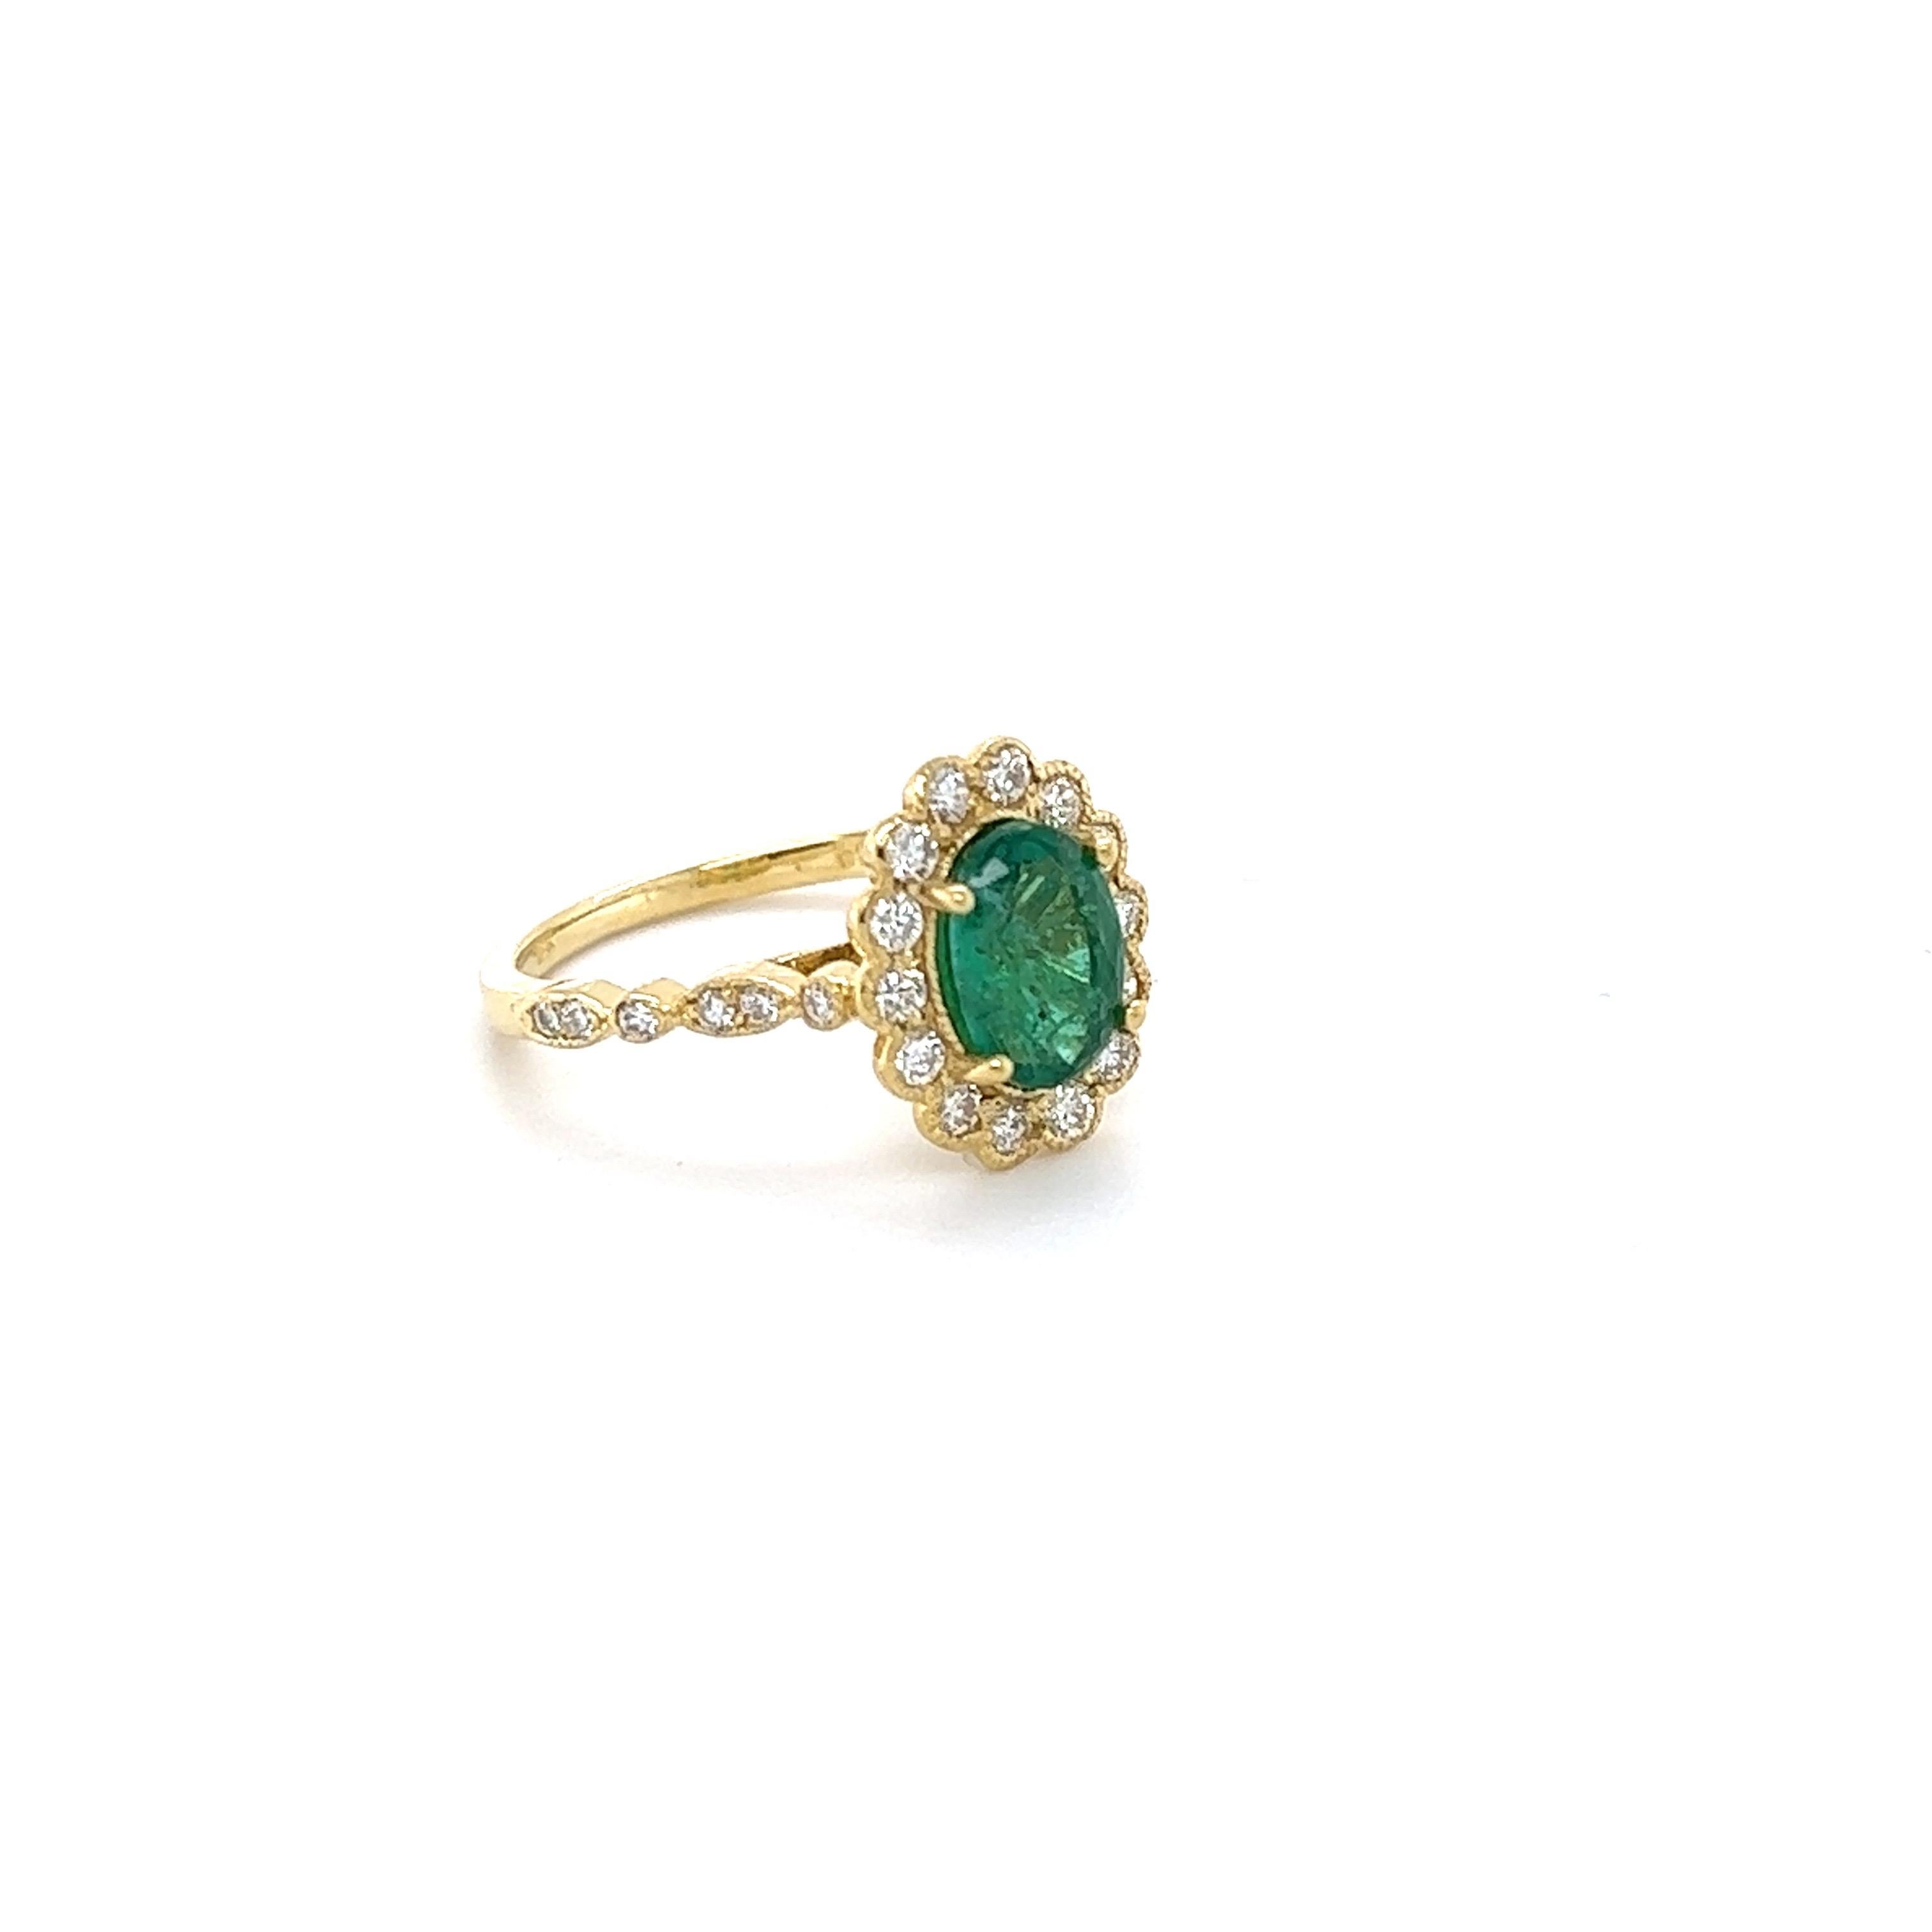 This ring has a 1.01 Carat Oval Cut Emerald and is surrounded by 28 Round Cut Diamonds that weighs 0.48 Carats. (Clarity: SI1, Color: F) The total carat weight of the ring is 1.49 carats. 
The Oval Cut Emerald measures at approximately 8 mm x 6 mm.